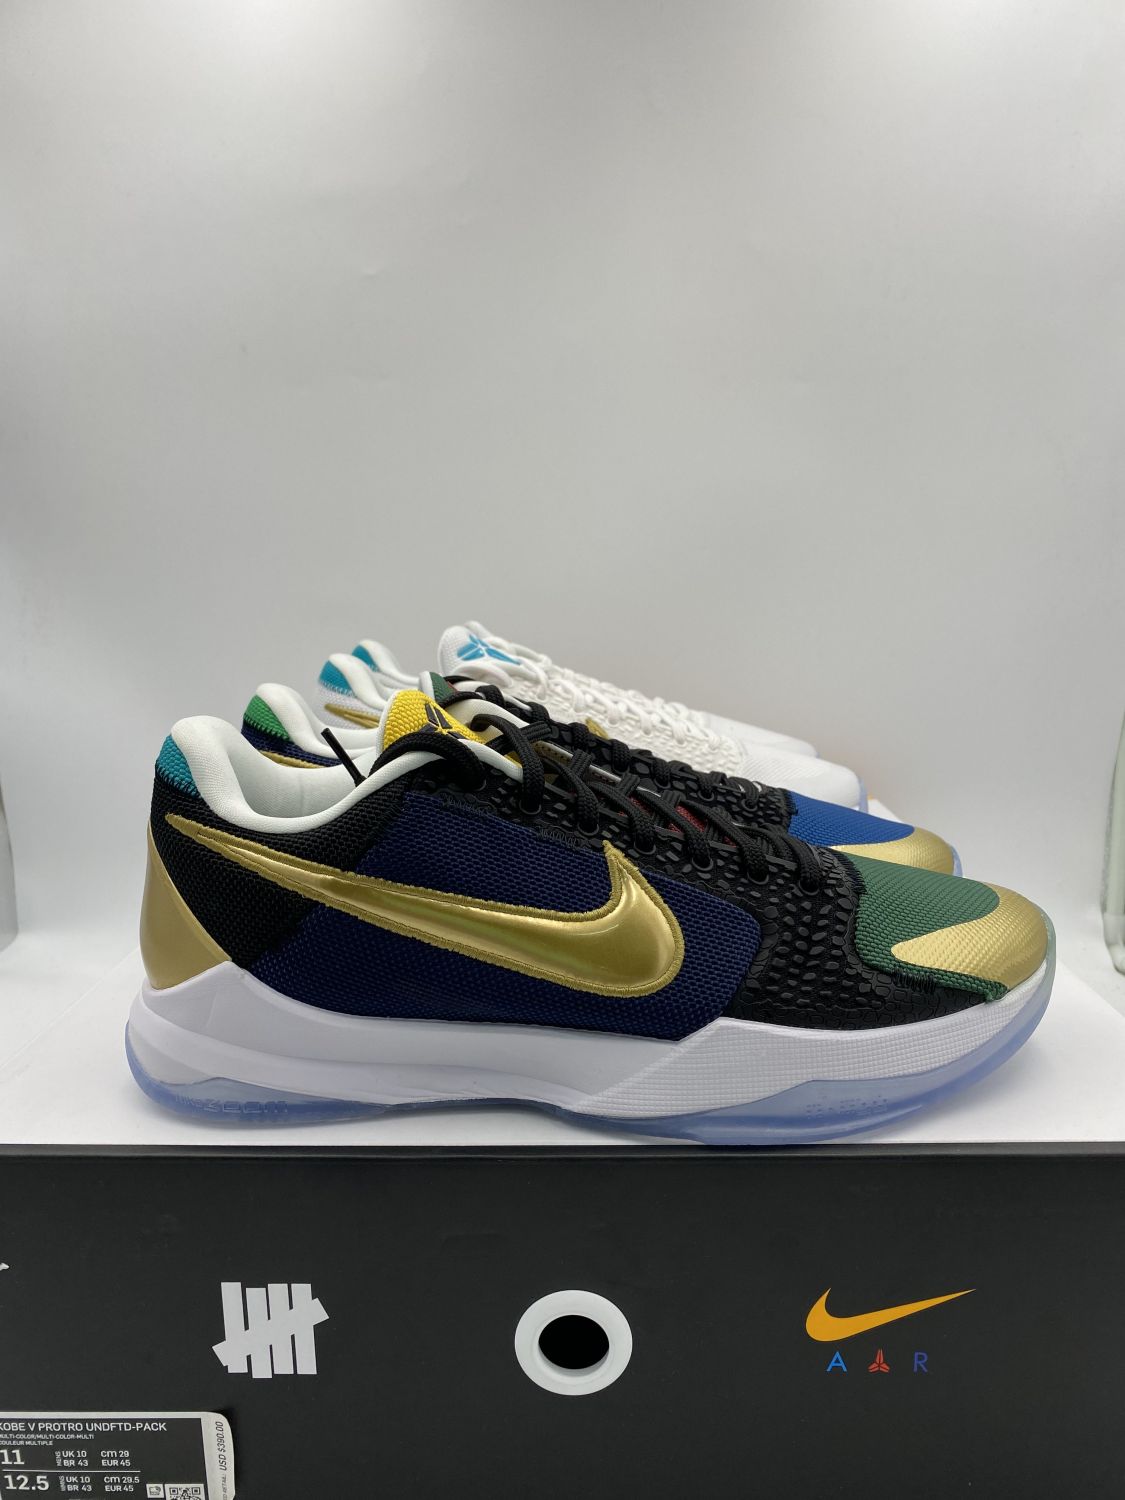 Nike Kobe 5 Protro Undefeated What If Pack | AfterMarket